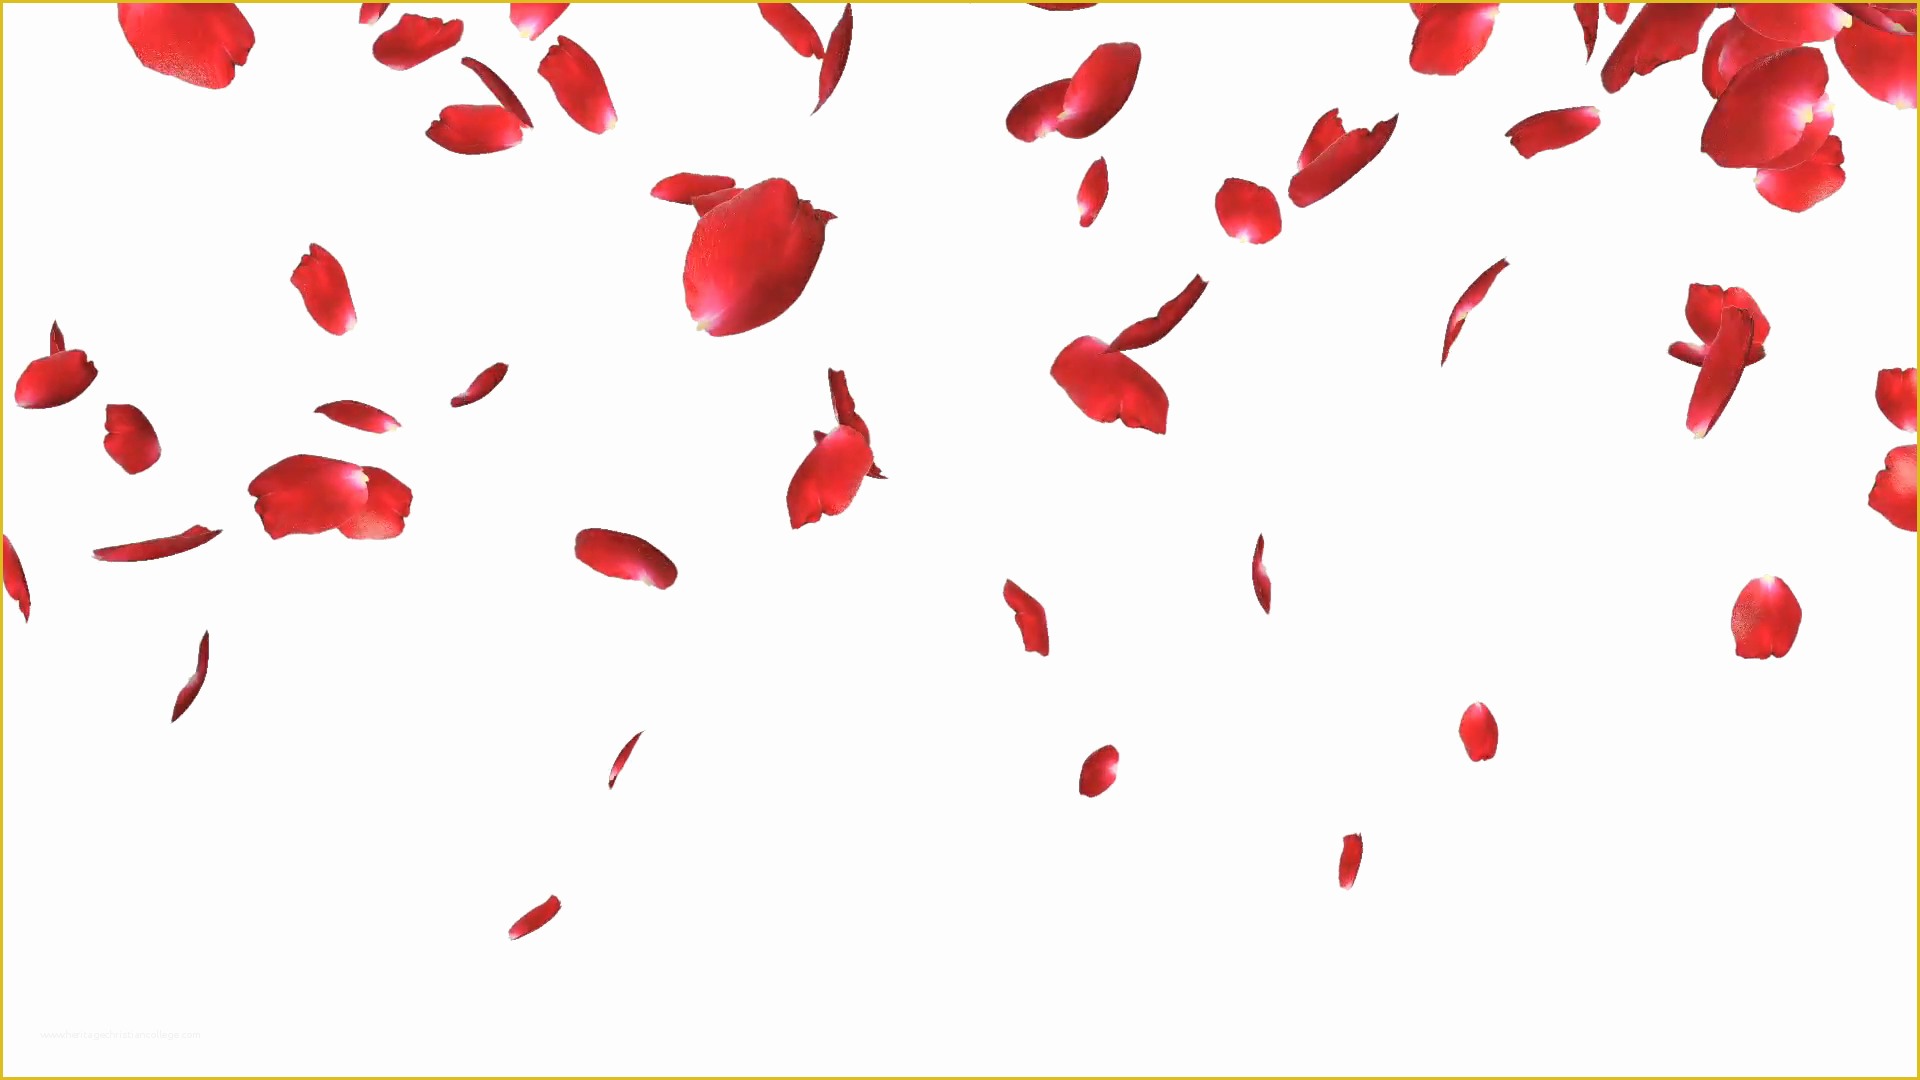 Falling Flower Petals after Effects Template Free Of Rose Petals Falling Against White Stock Video Footage